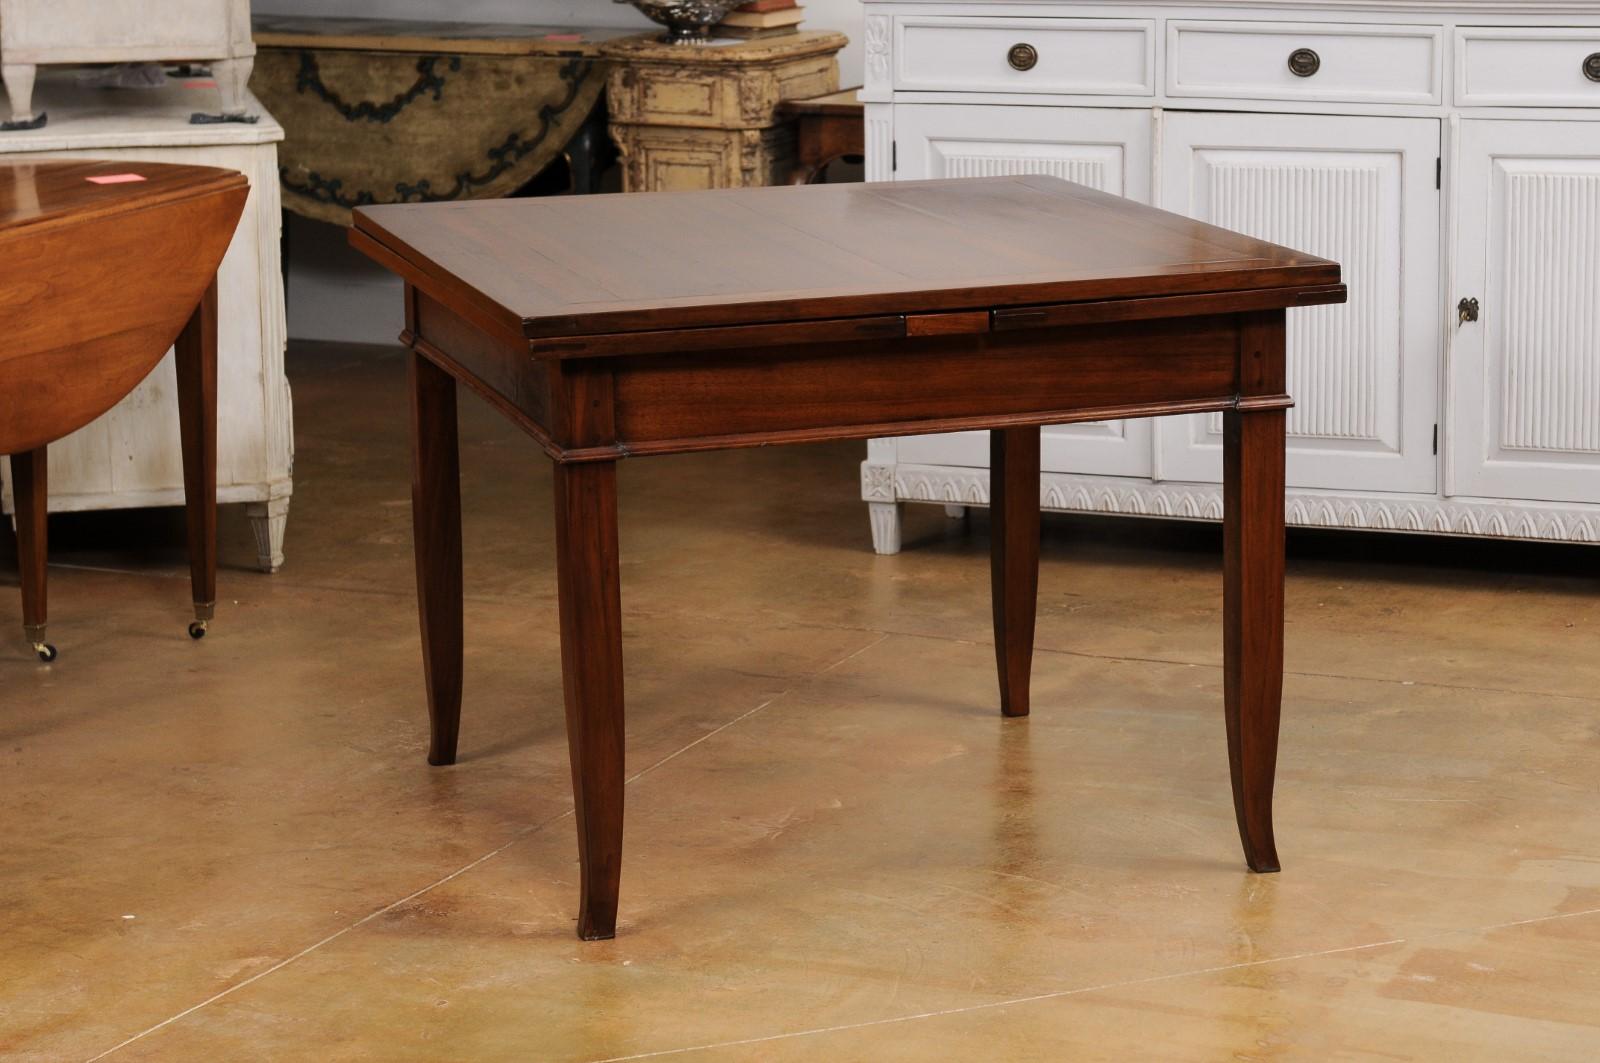 Italian, 19th Century, Walnut Table with Two Extending Leaves and Curving Legs In Good Condition For Sale In Atlanta, GA